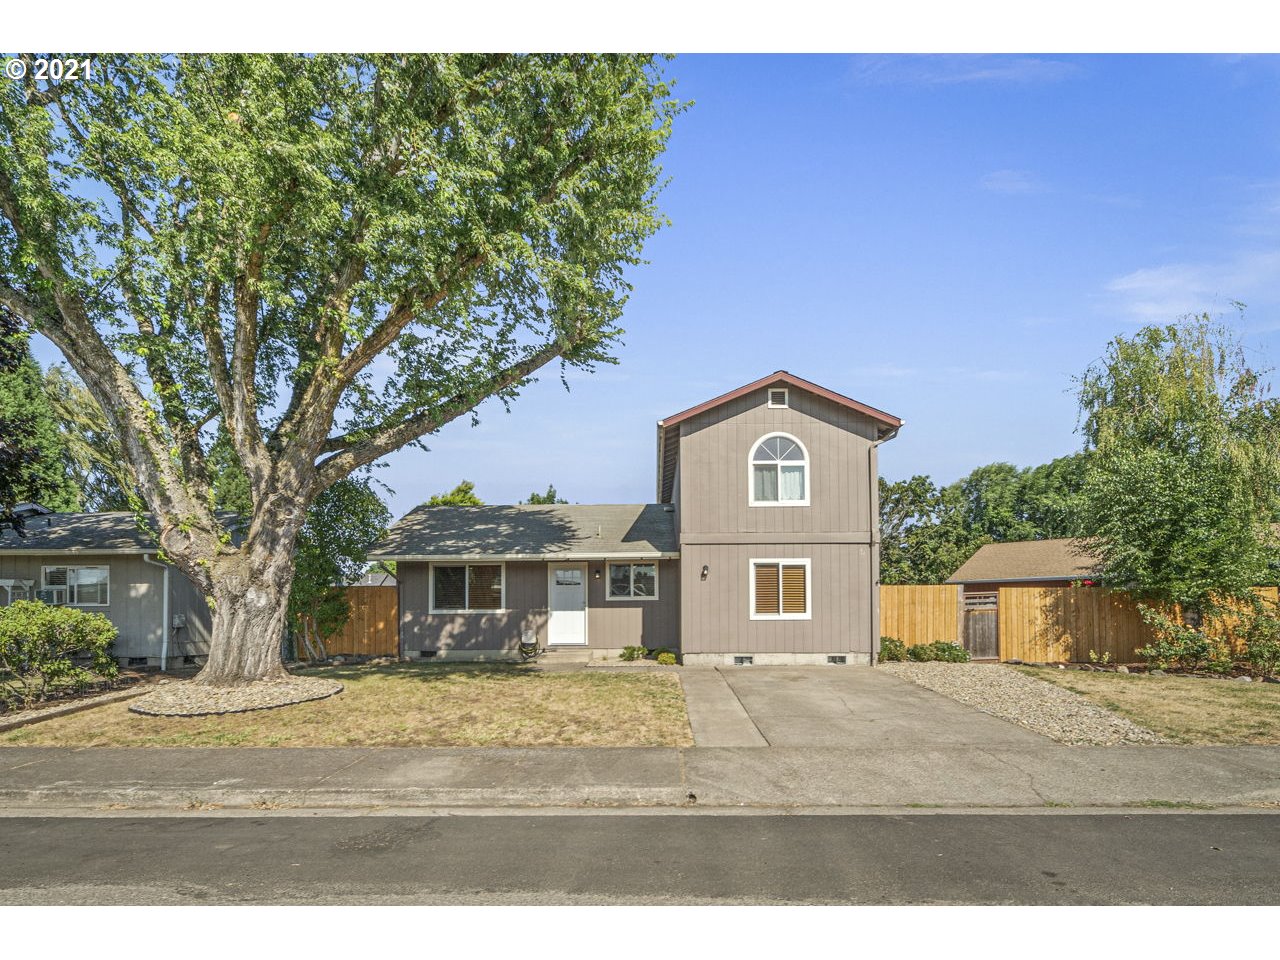 825 S 8TH PL (1 of 20)